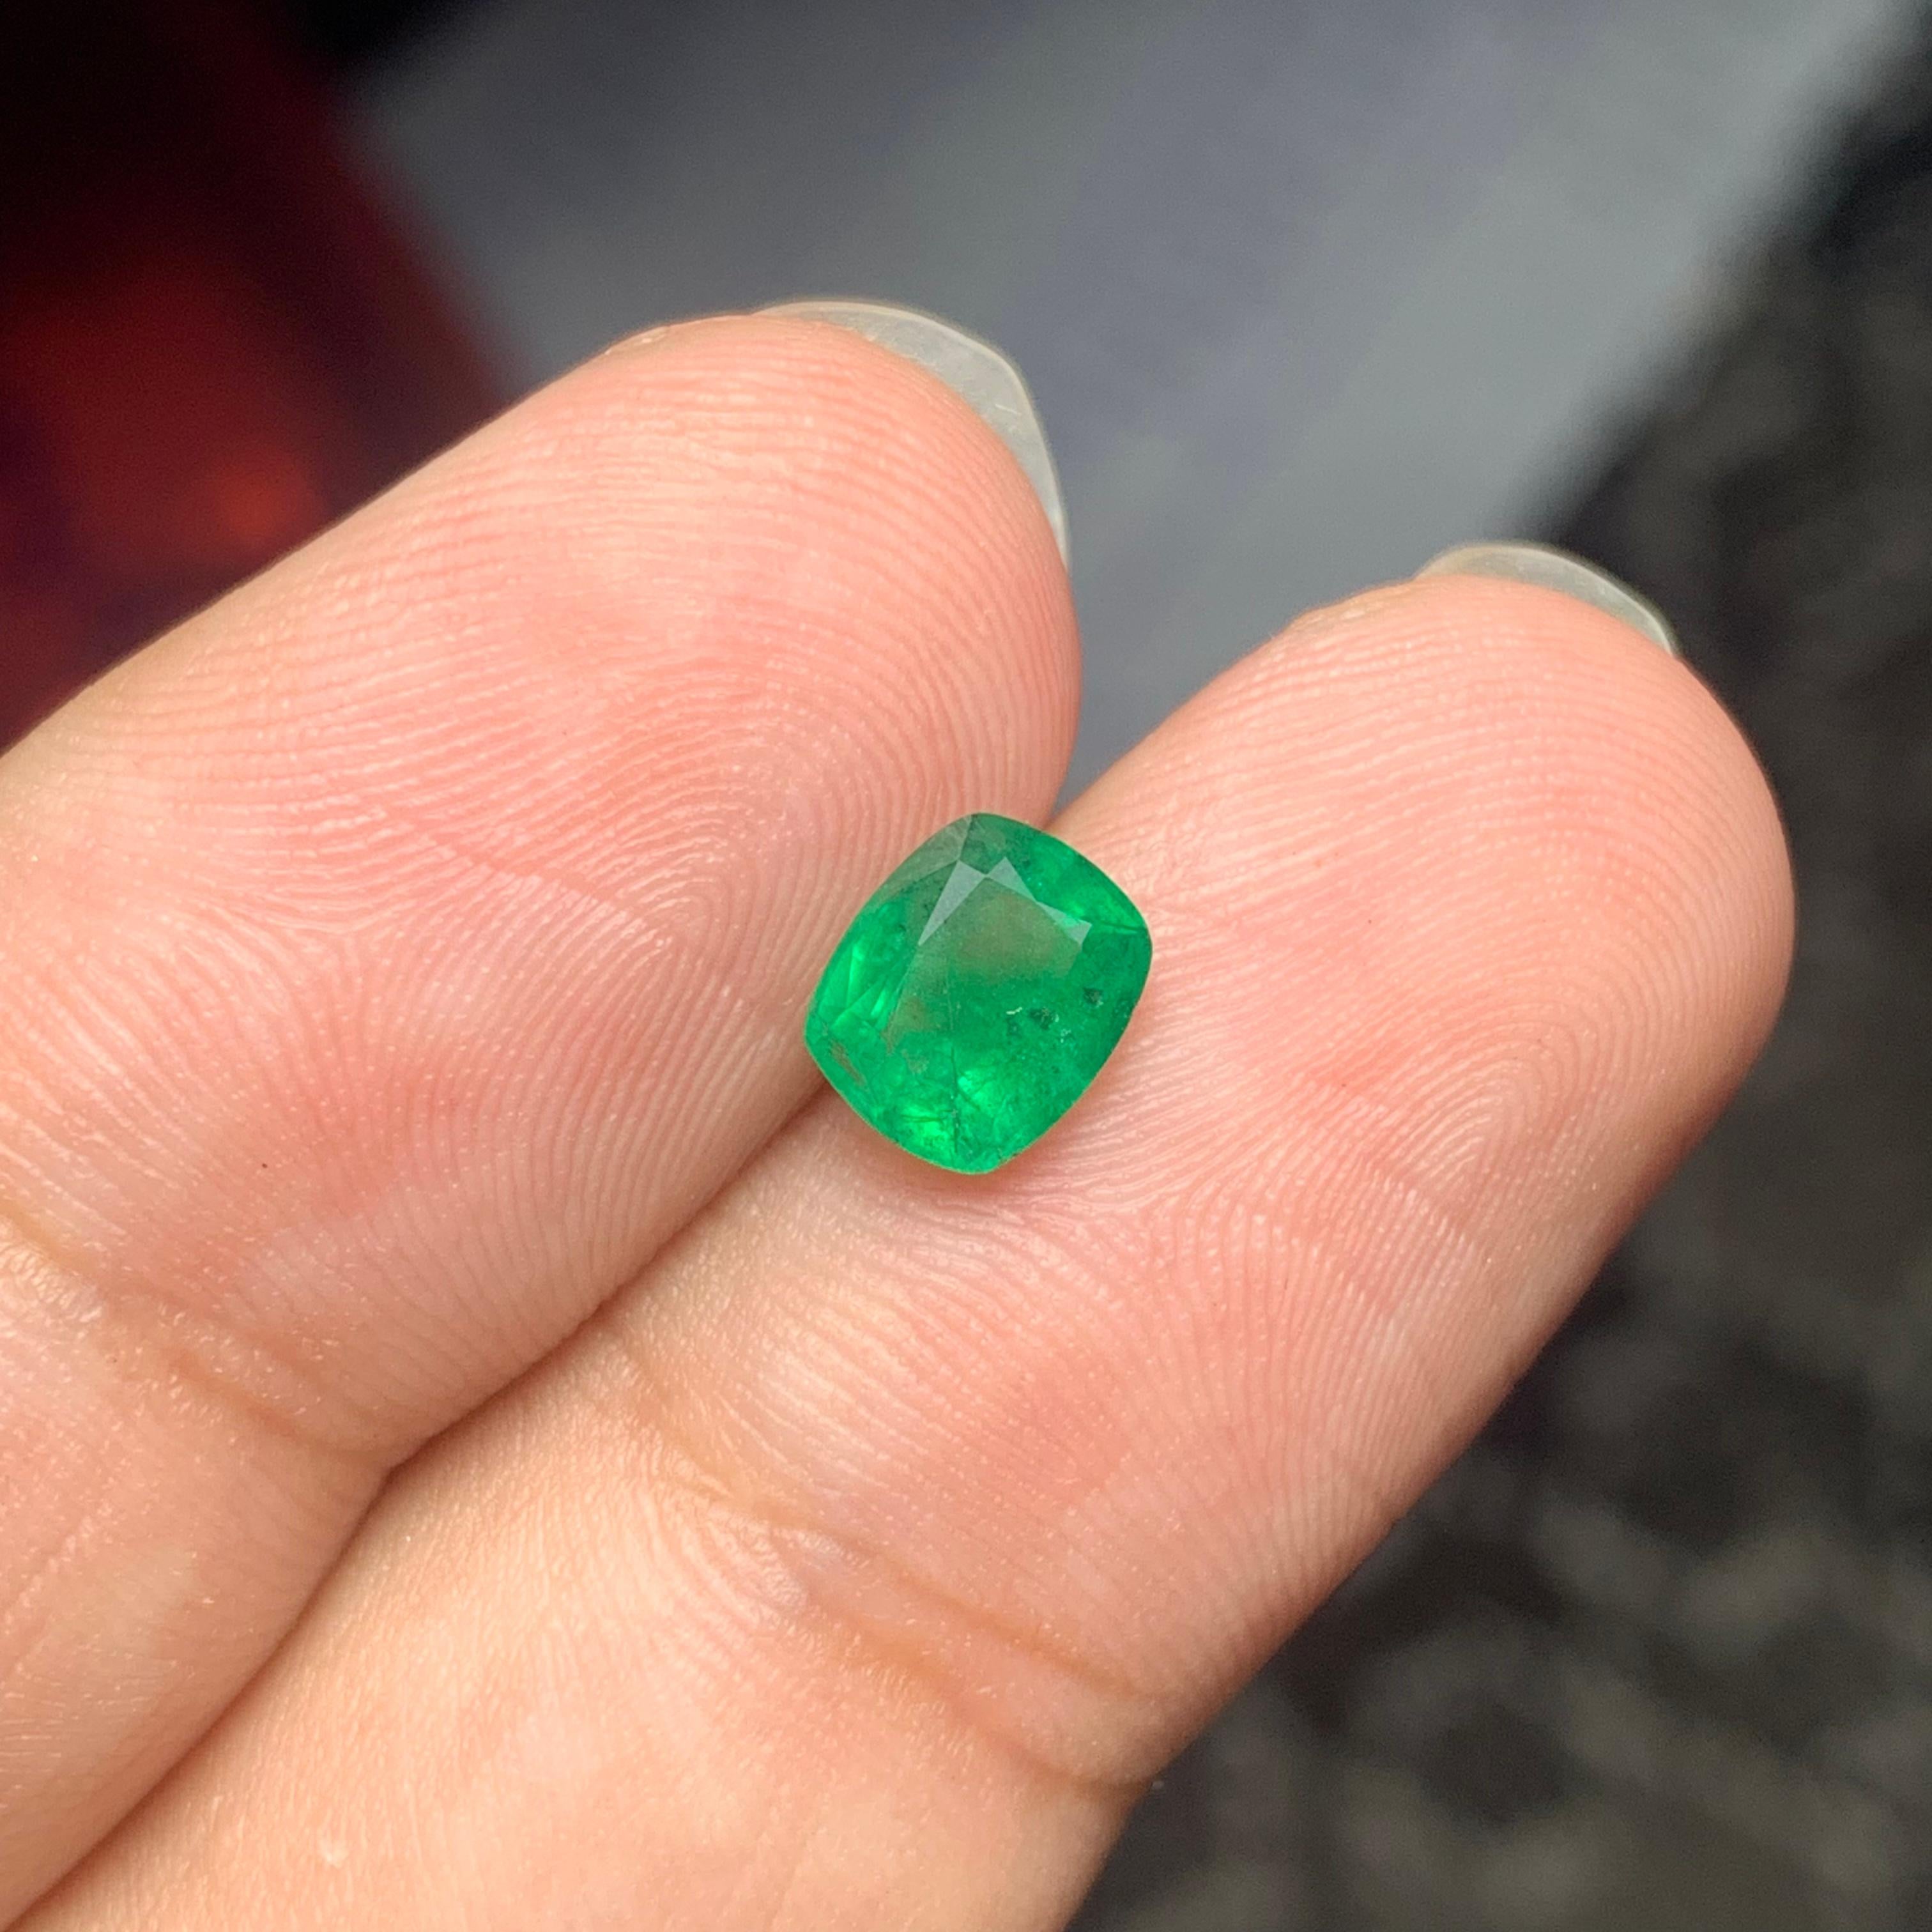 Faceted Emerald 
Weight: 1 Carats 
Origin: Swat Pakistan 
Color: Green 
Dimension: 7.2x6.1x3.9 Mm
Treatment: Non
Certificate: On Customer Demand 
.
The emerald is a stunning green gemstone that is a variety of the mineral beryl, with its distinctive